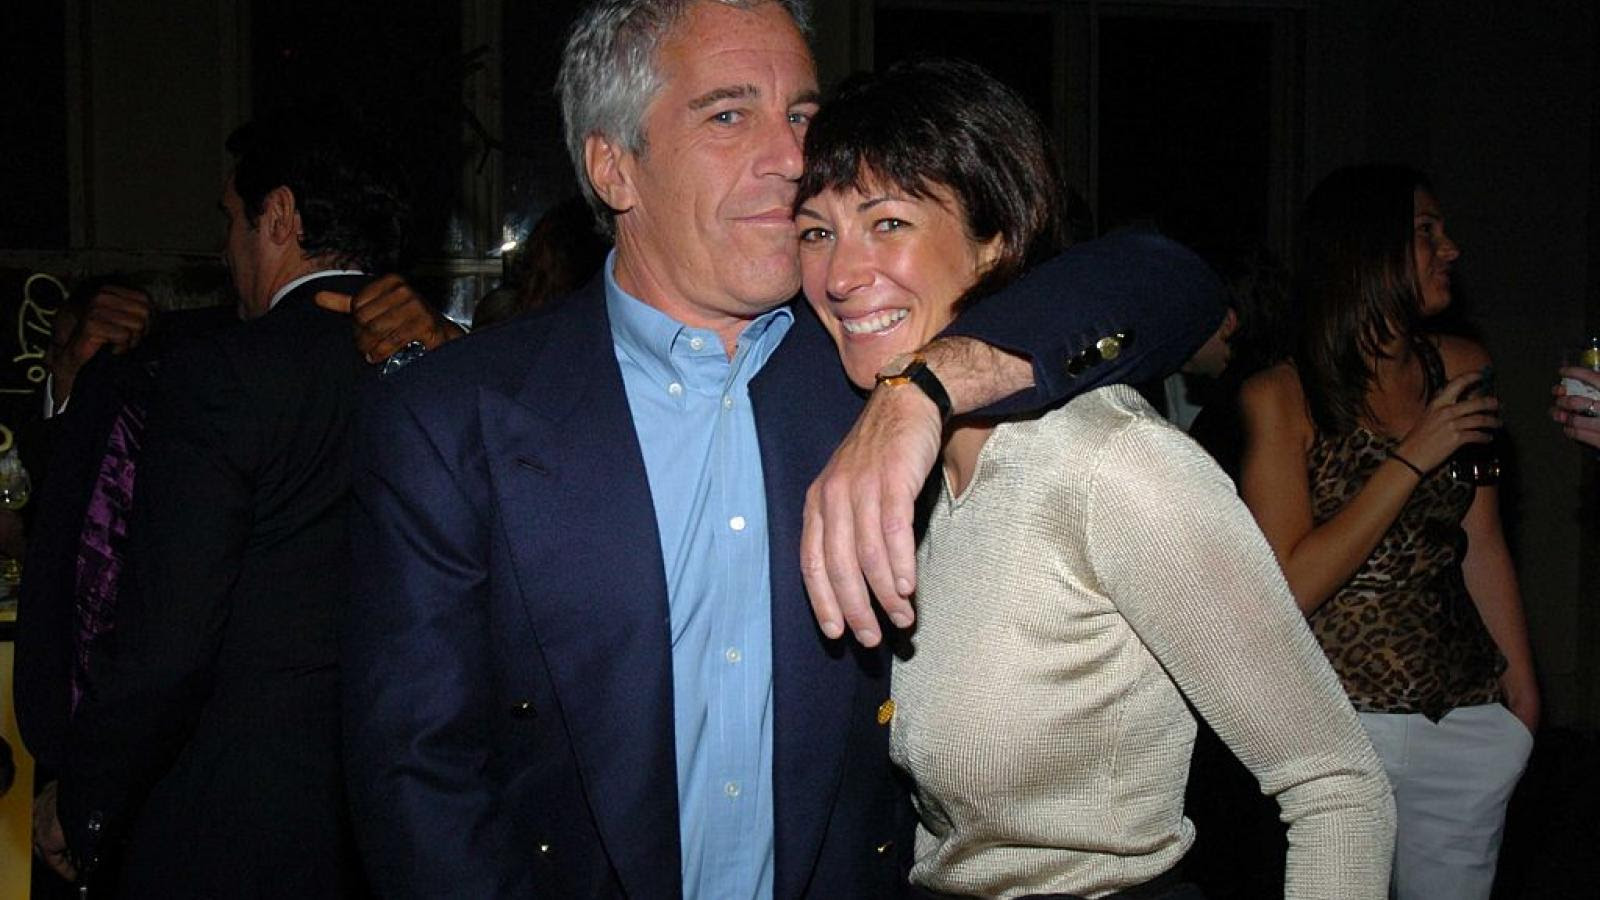 BREAKING - Jury finds Ghislaine Maxwell guilty GettyImages-590696434